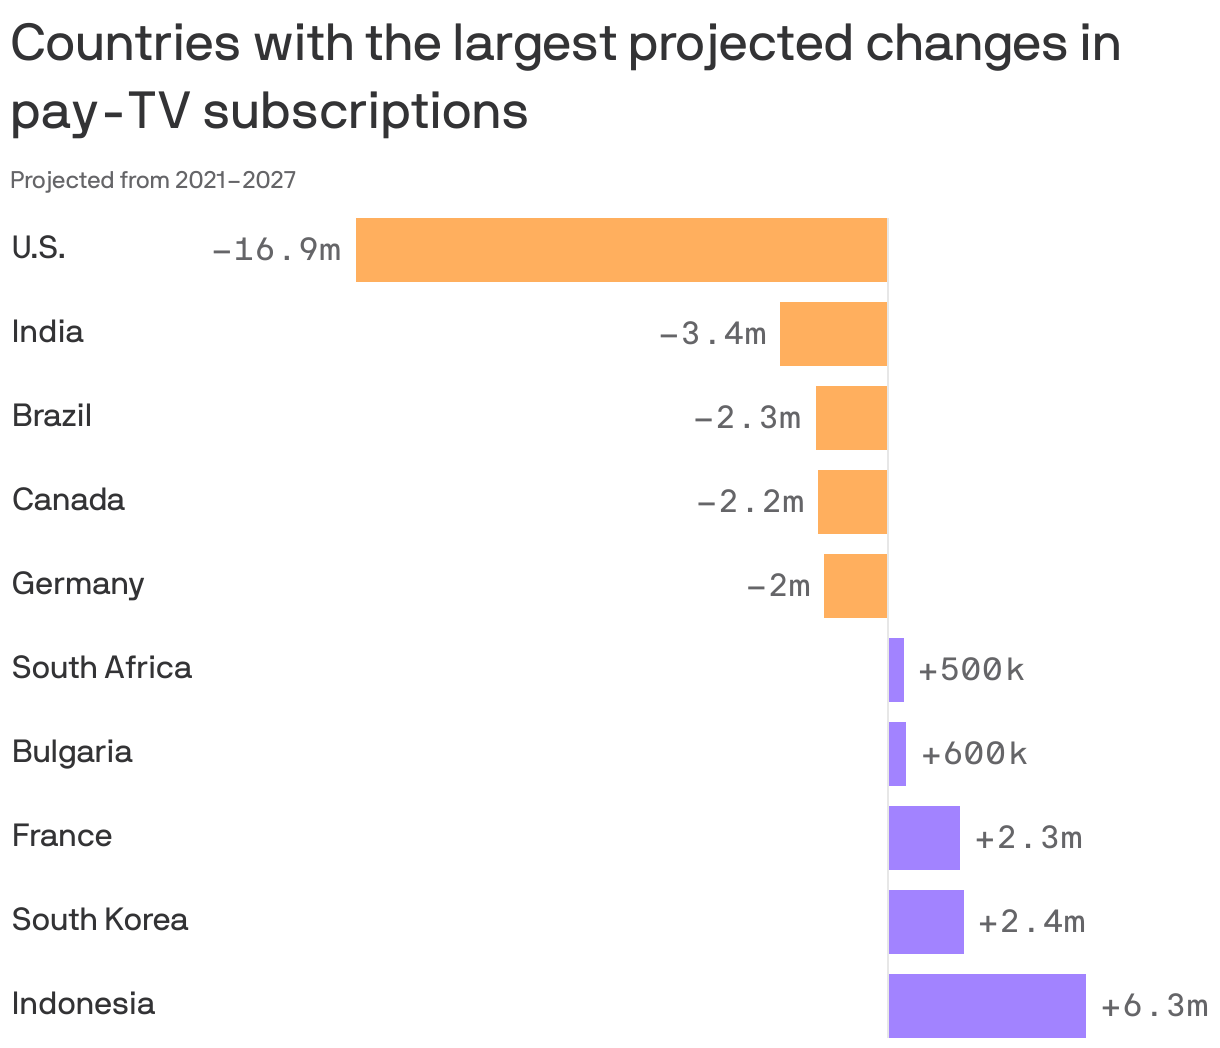 Countries with the largest projected changes in pay-TV subscriptions